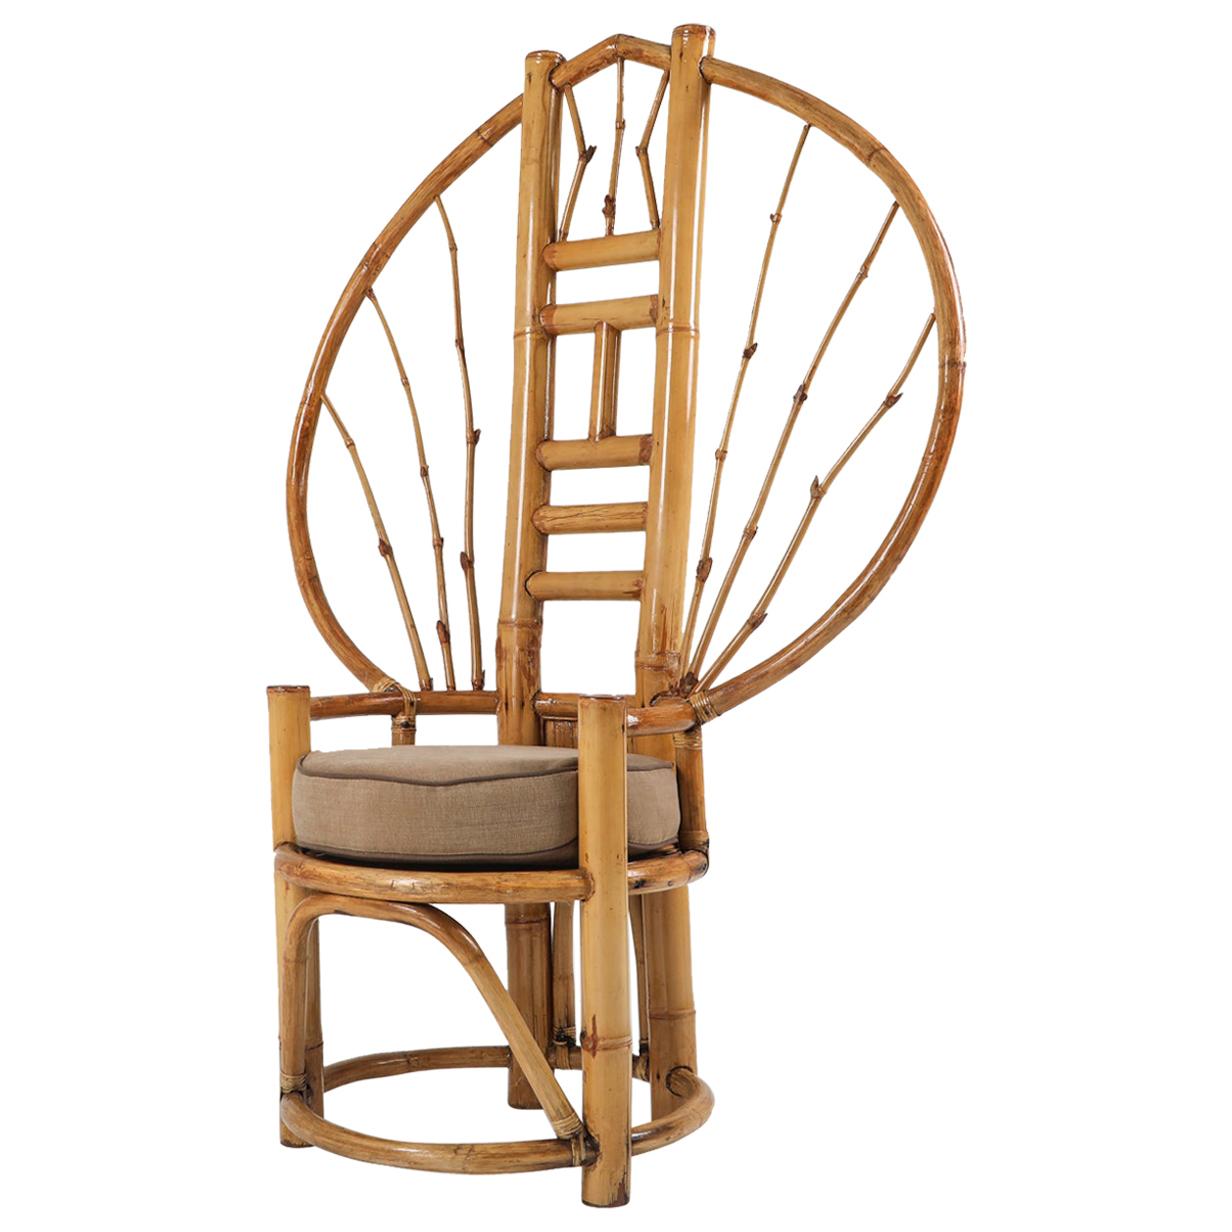 Bamboo Peacock Chairs in the Style of Albini